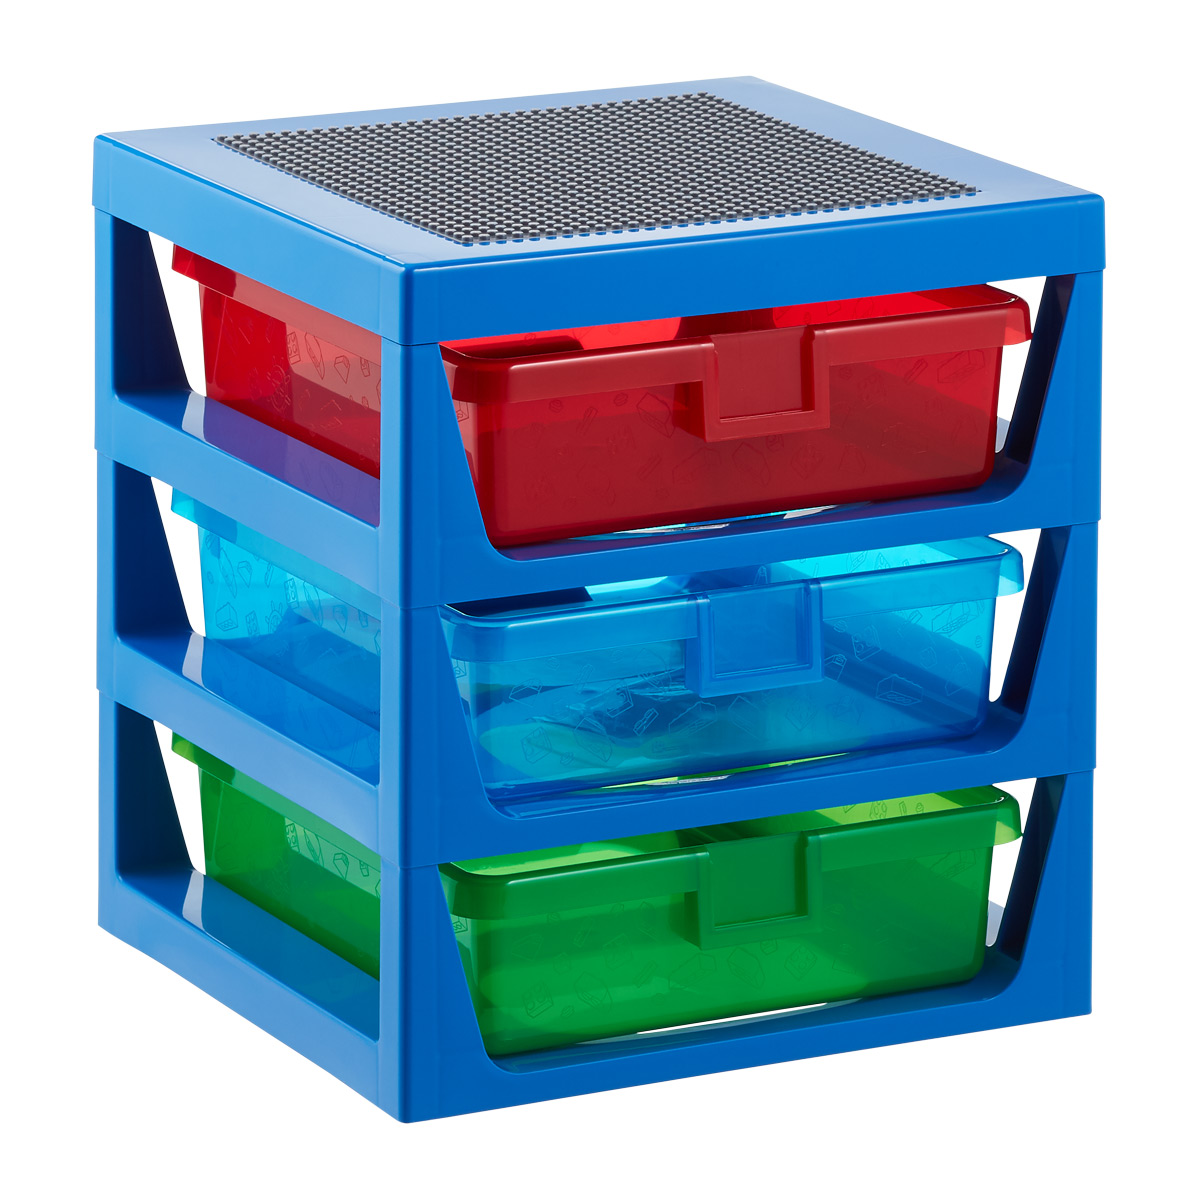 https://www.containerstore.com/catalogimages/378791/10079315-lego-3-tier-drawer-with-bas.jpg